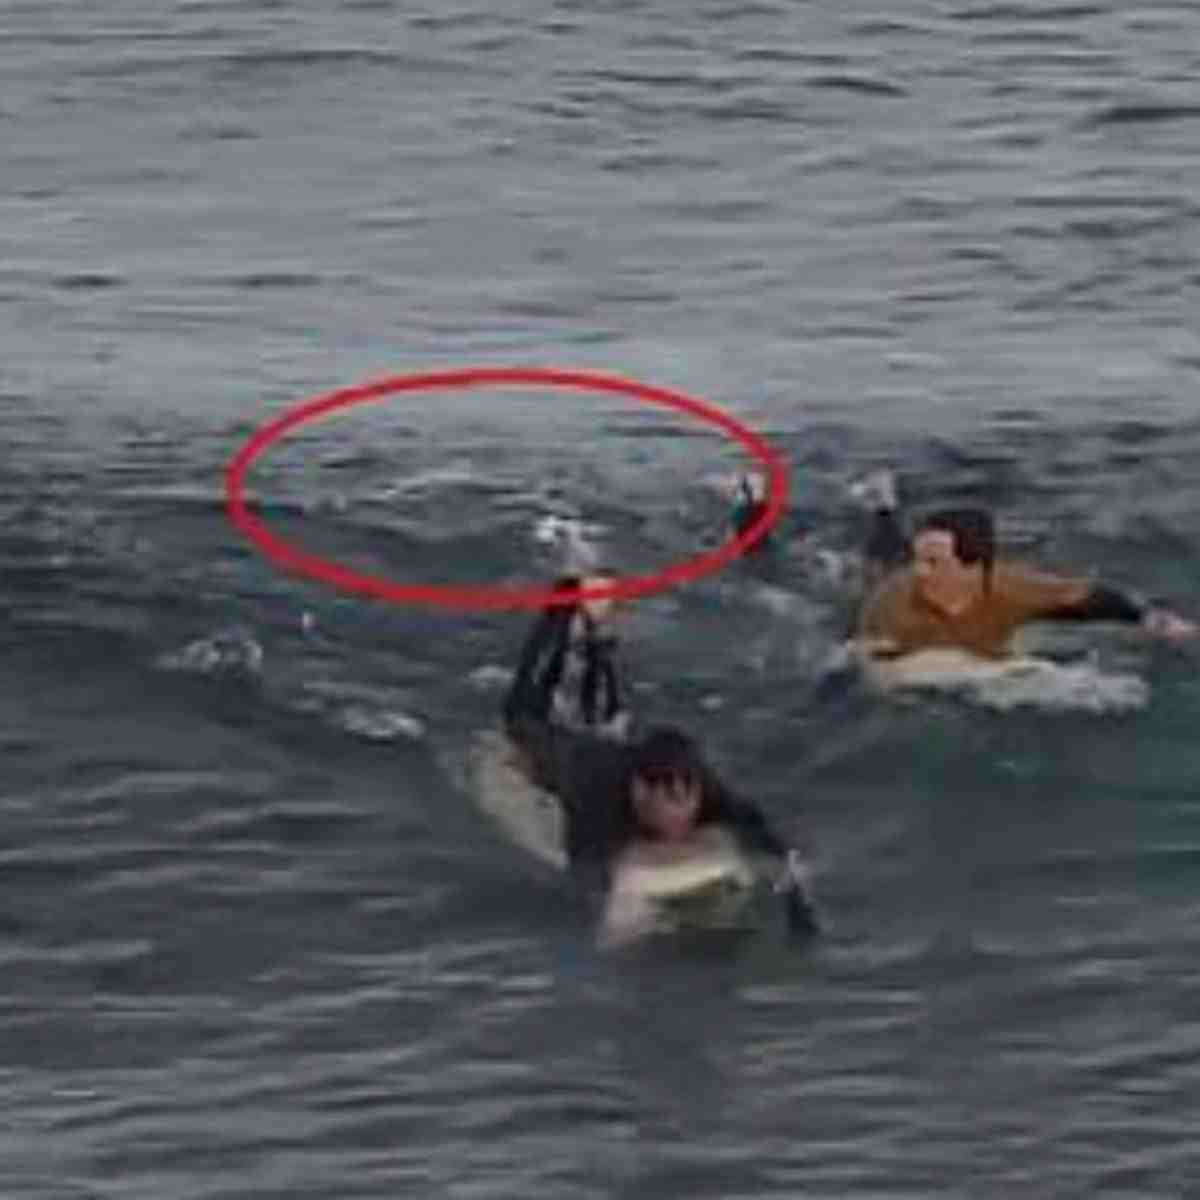 What to do if you see a shark in the water while surfing?